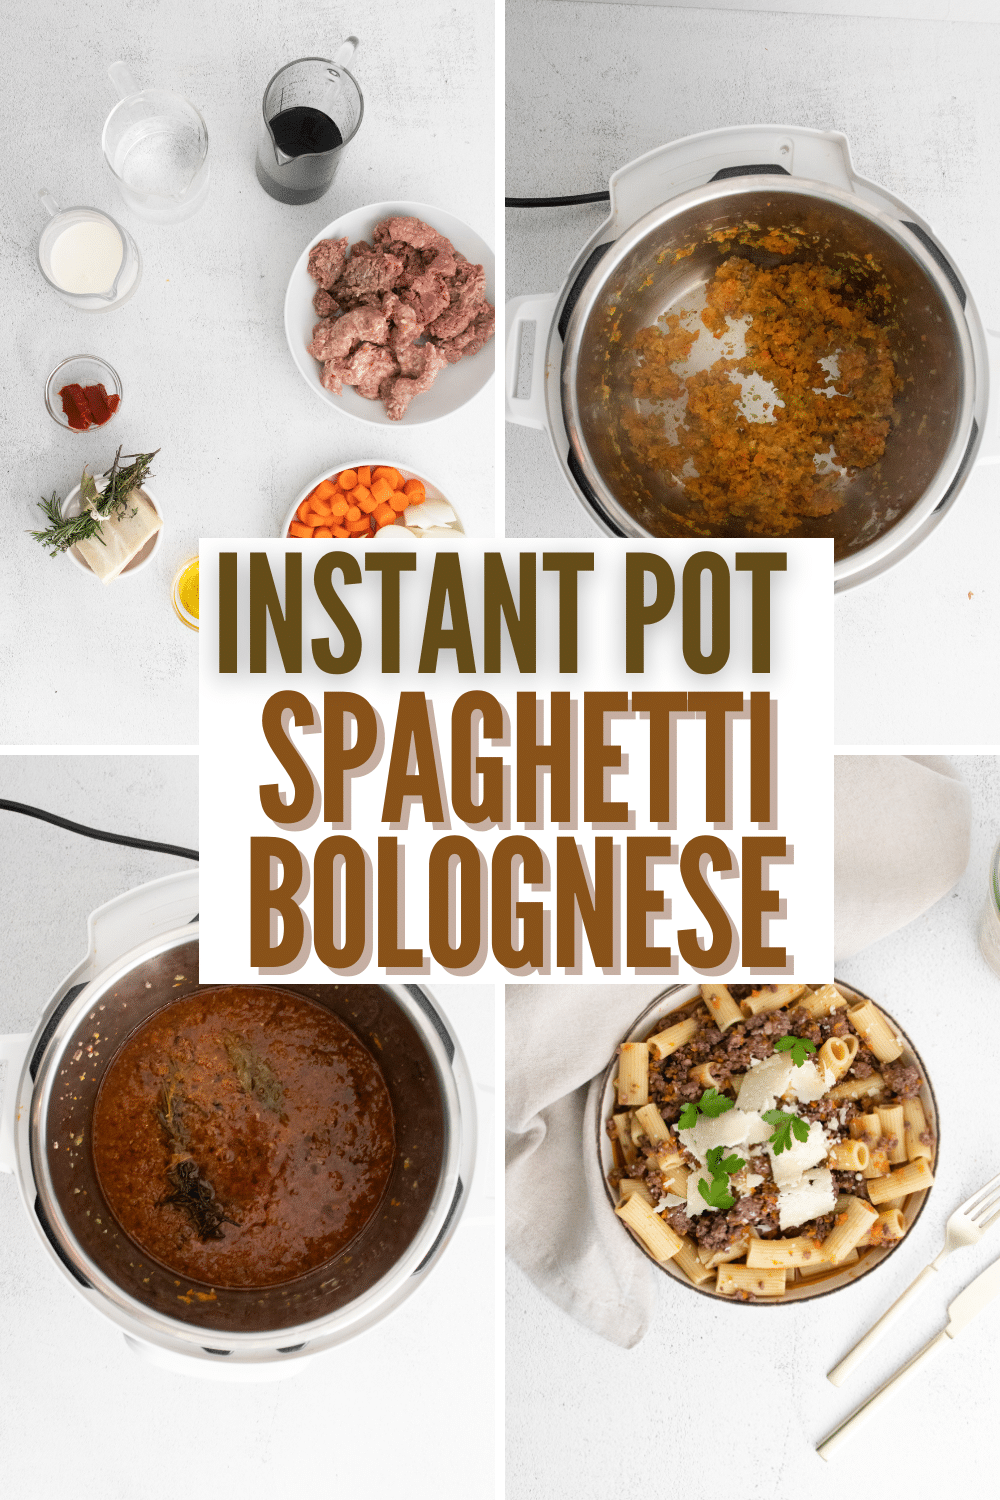 Instant Pot Spaghetti Bolognese is the perfect fast and easy weeknight meal. It’s a delicious one-pot dish that's the ultimate comfort food! #instantpot #pressurecooker #spaghettibolognese #dinnerrecipe via @wondermomwannab